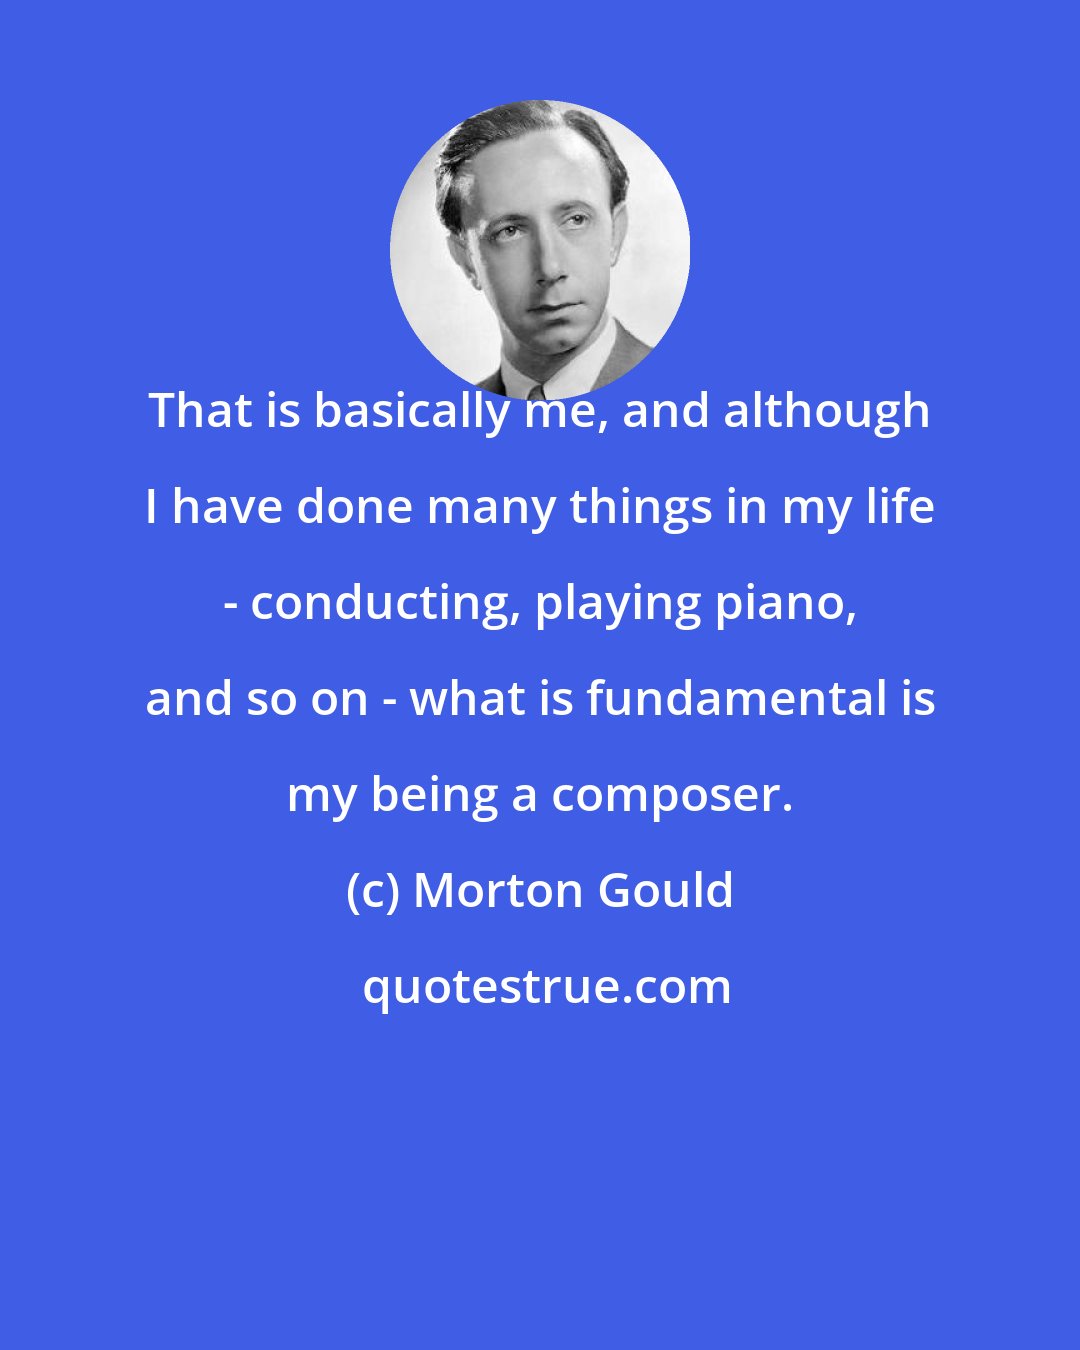 Morton Gould: That is basically me, and although I have done many things in my life - conducting, playing piano, and so on - what is fundamental is my being a composer.